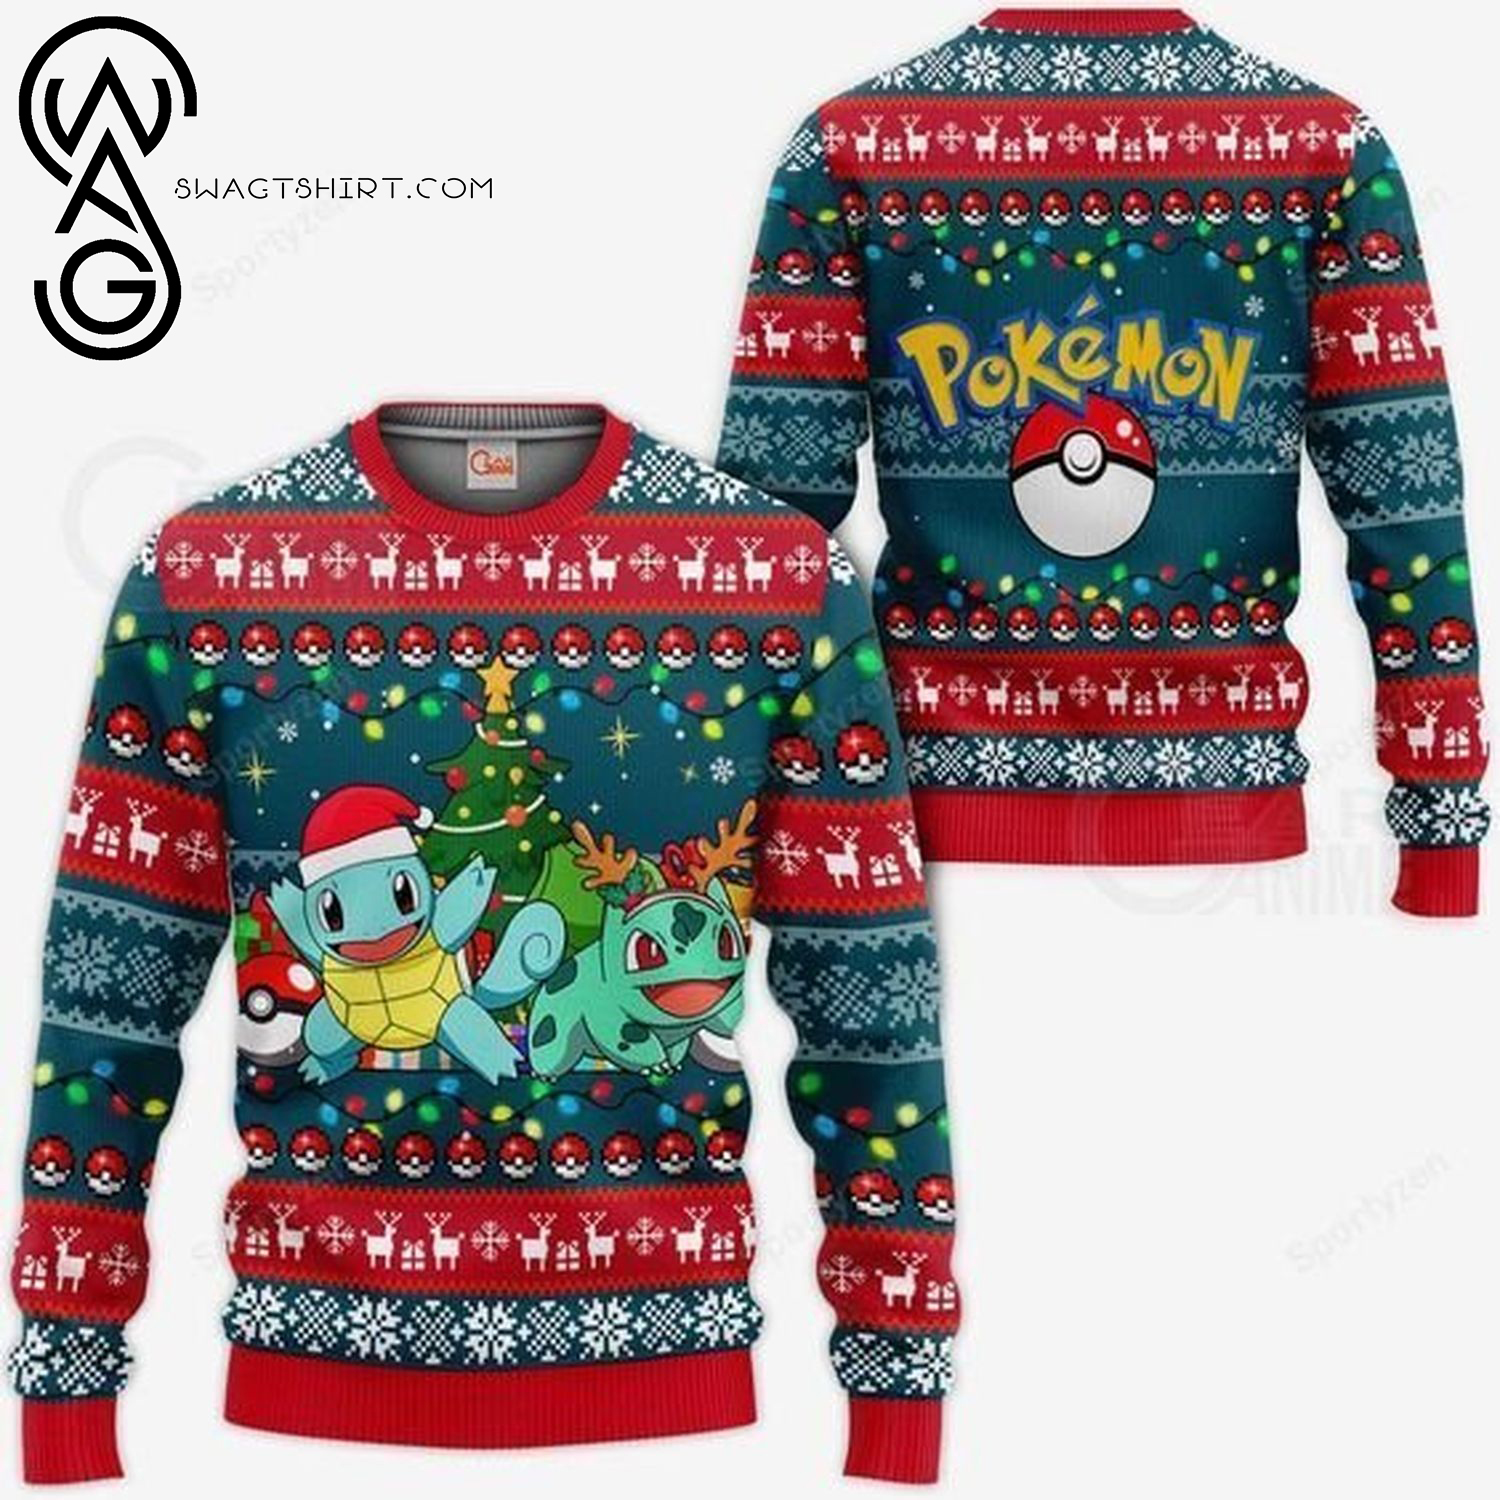 Pokemon Bulbasaur and Squirtle Full Print Ugly Christmas Sweater